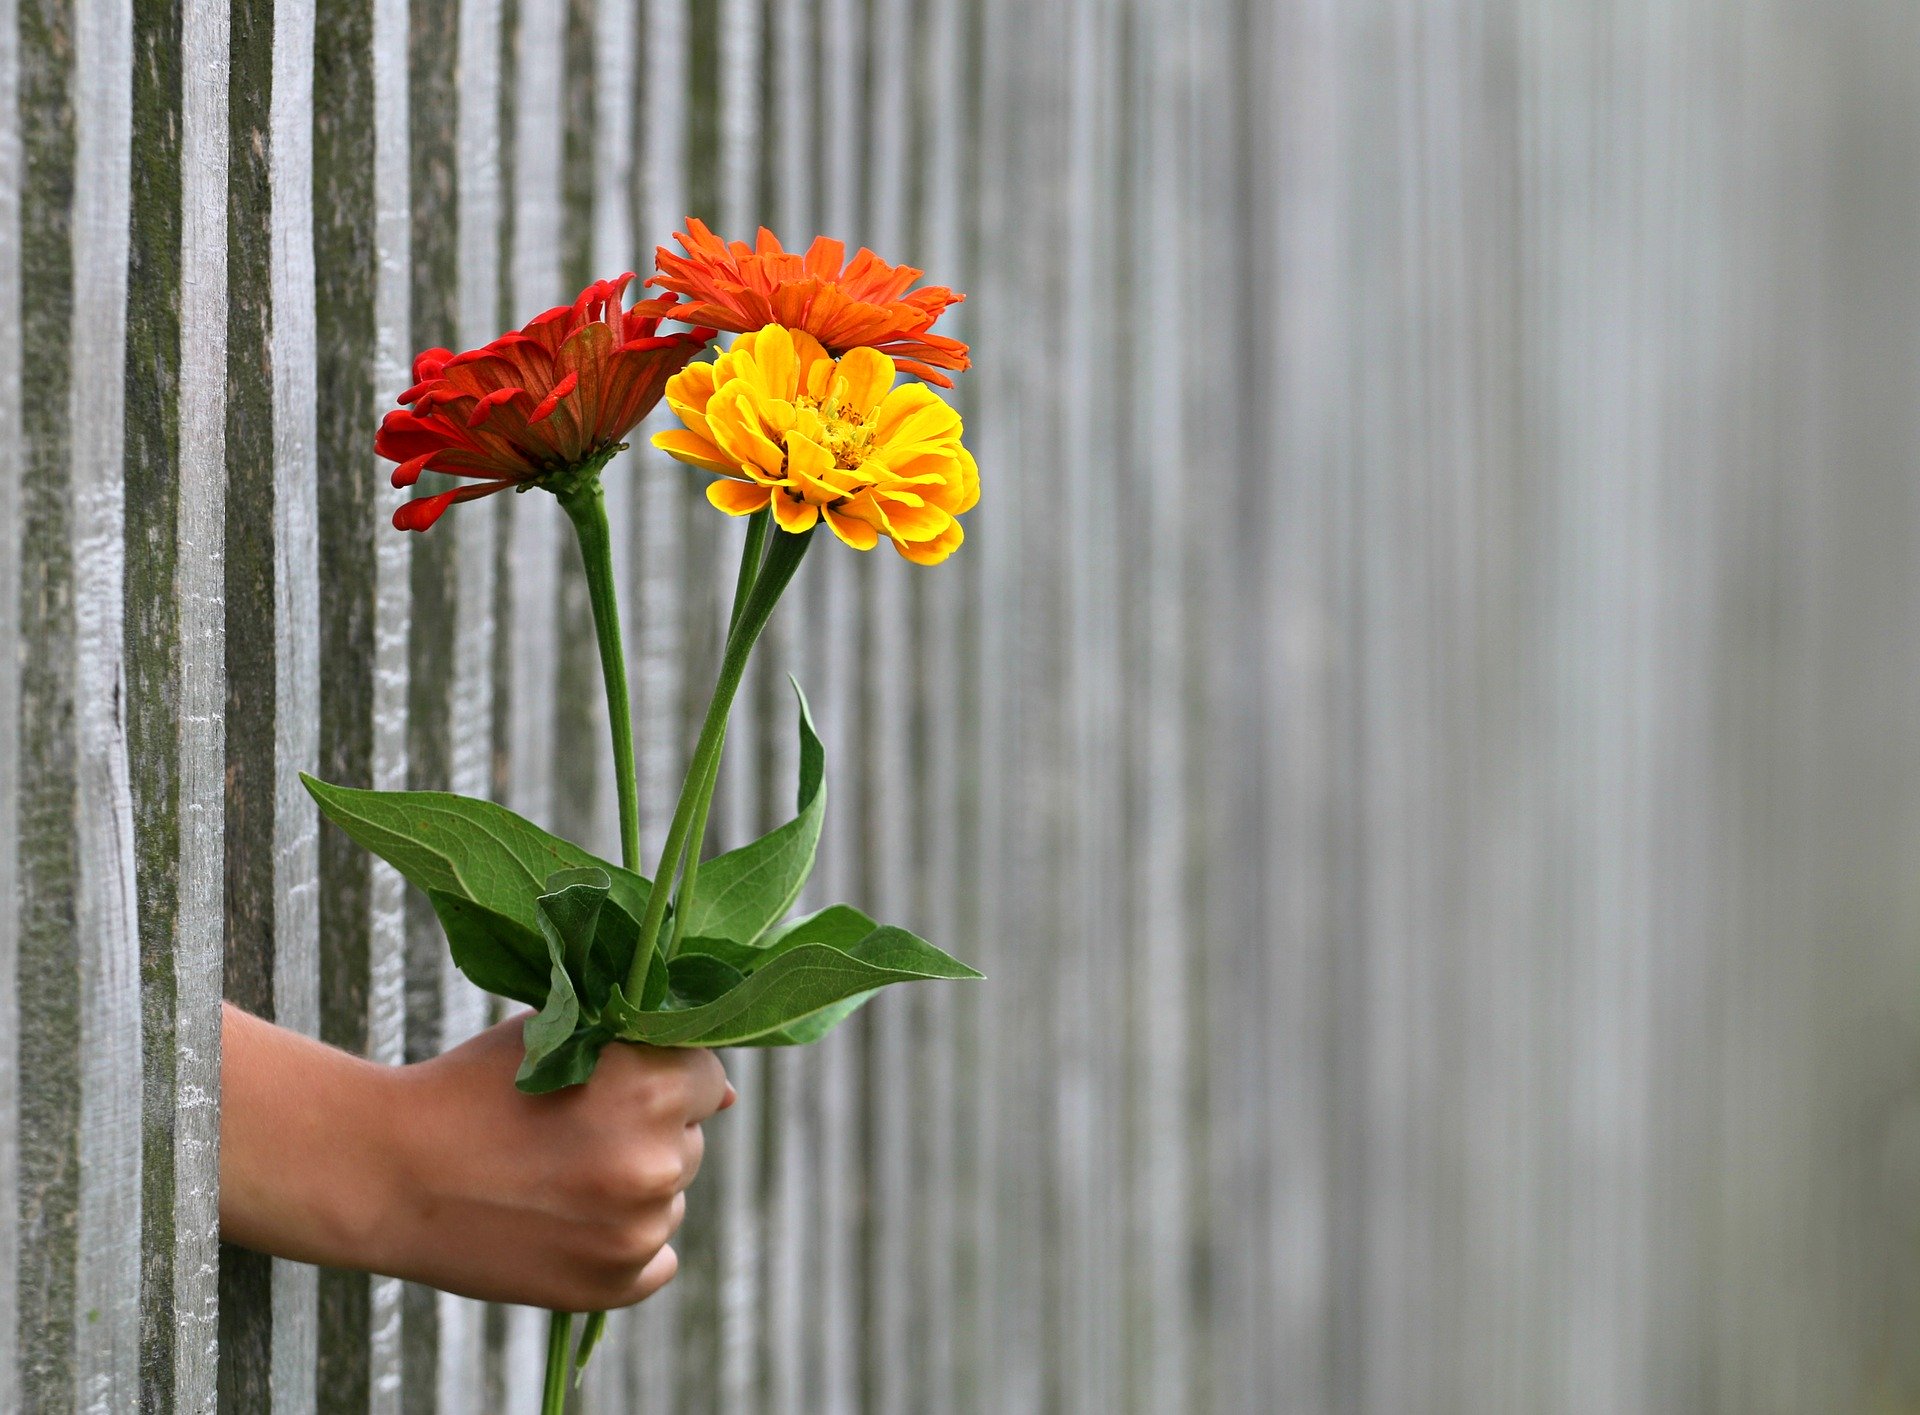 Hand holding flowers through a fence